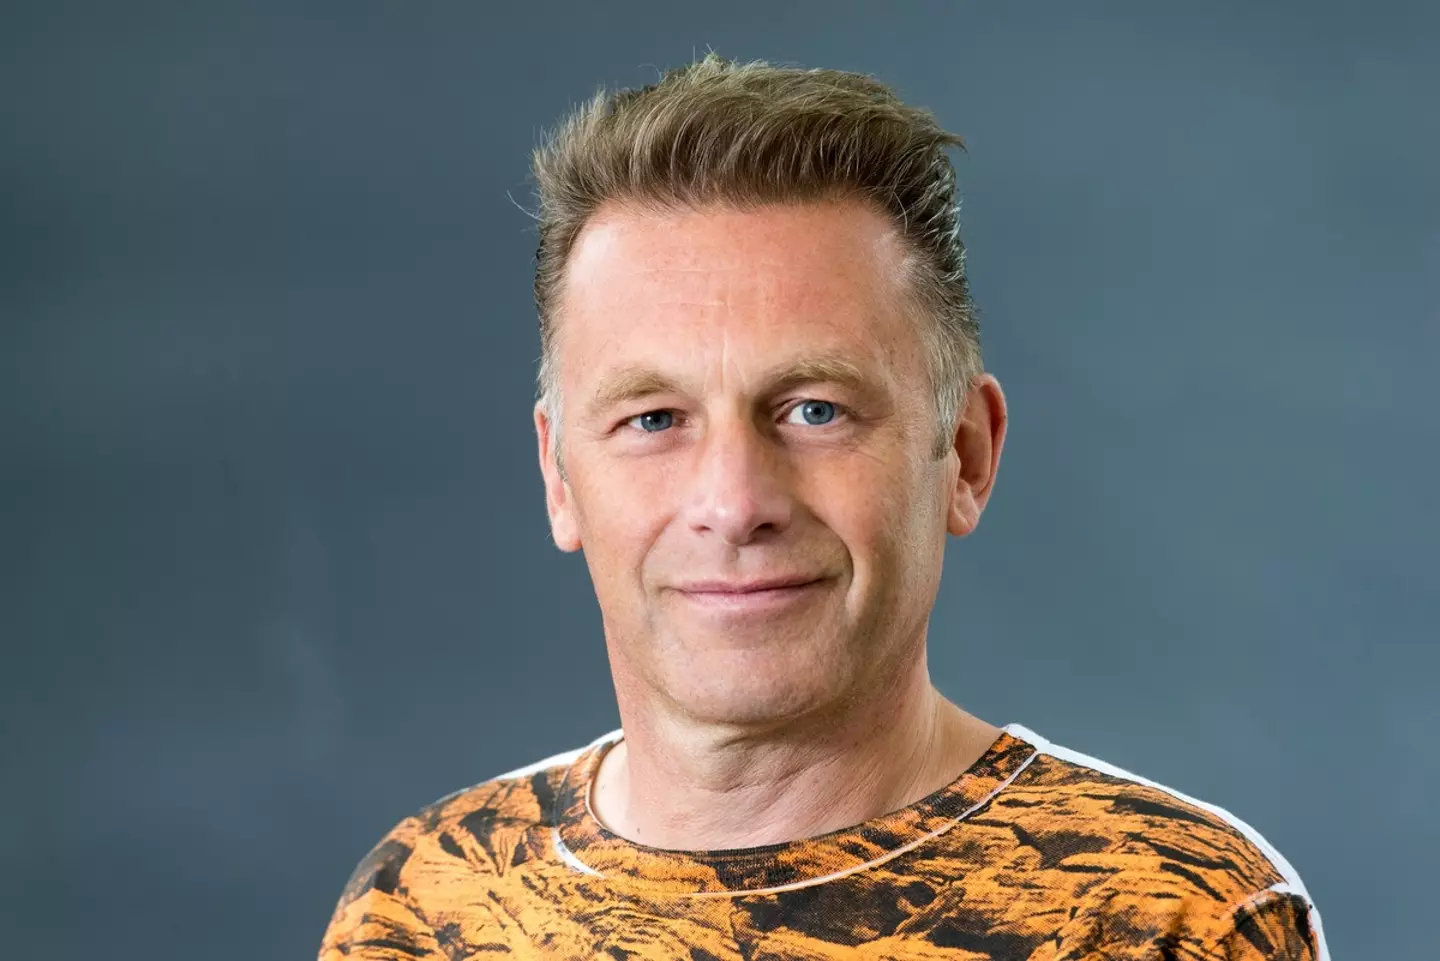 Chris Packham slammed the presenters in a strongly worded letter.